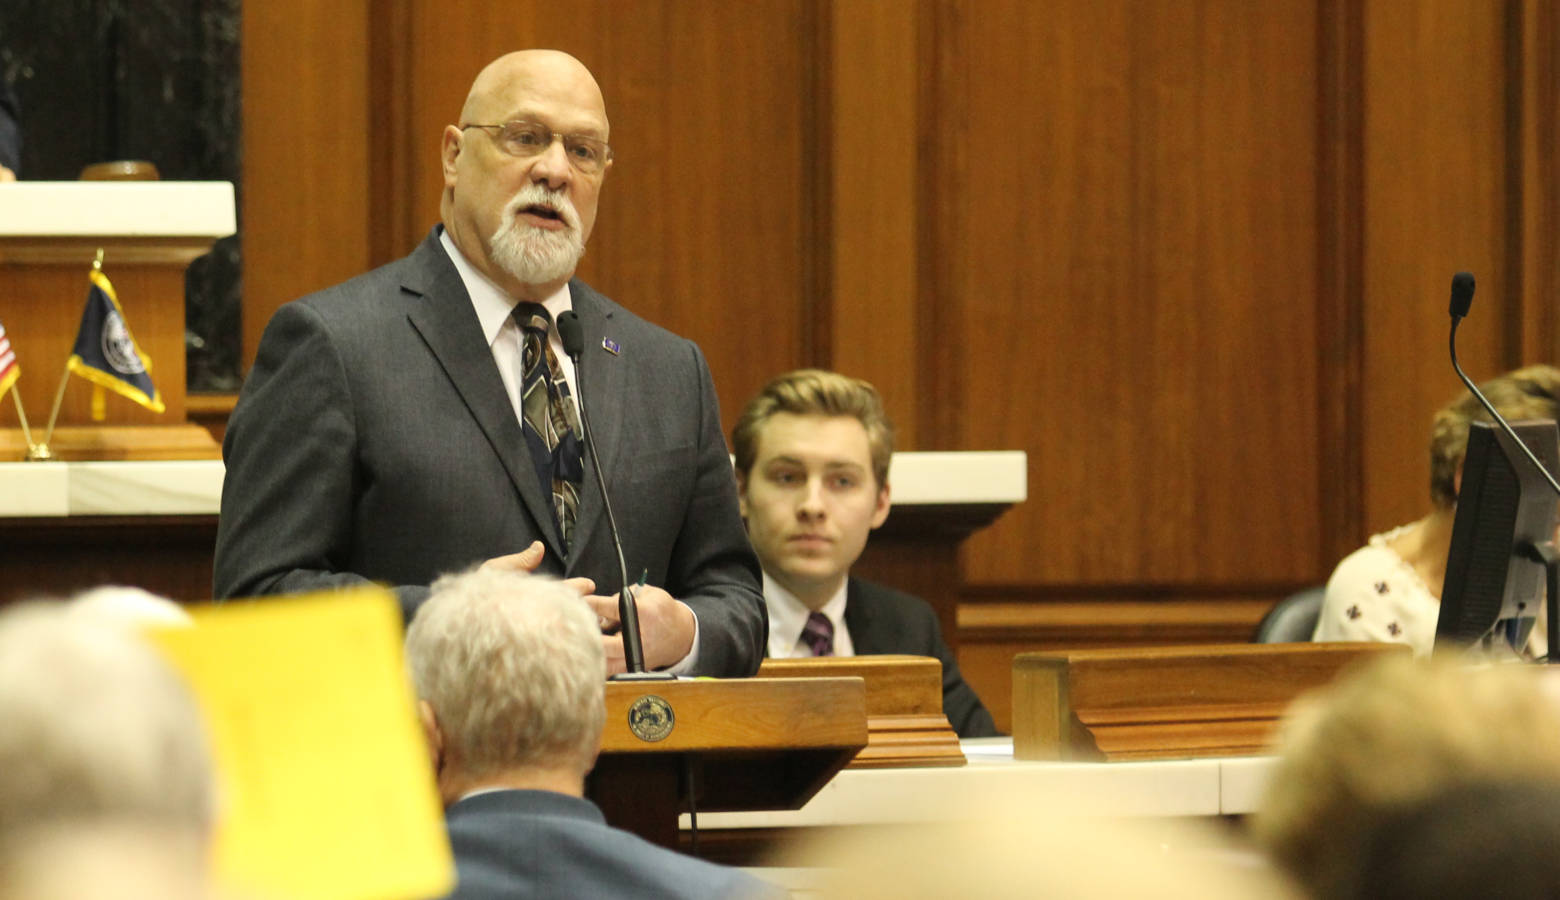 Rep. Tim Brown (R-Crawfordsville) says the latest legislation builds on previous school safety investments. (Lauren Chapman/IPB News)